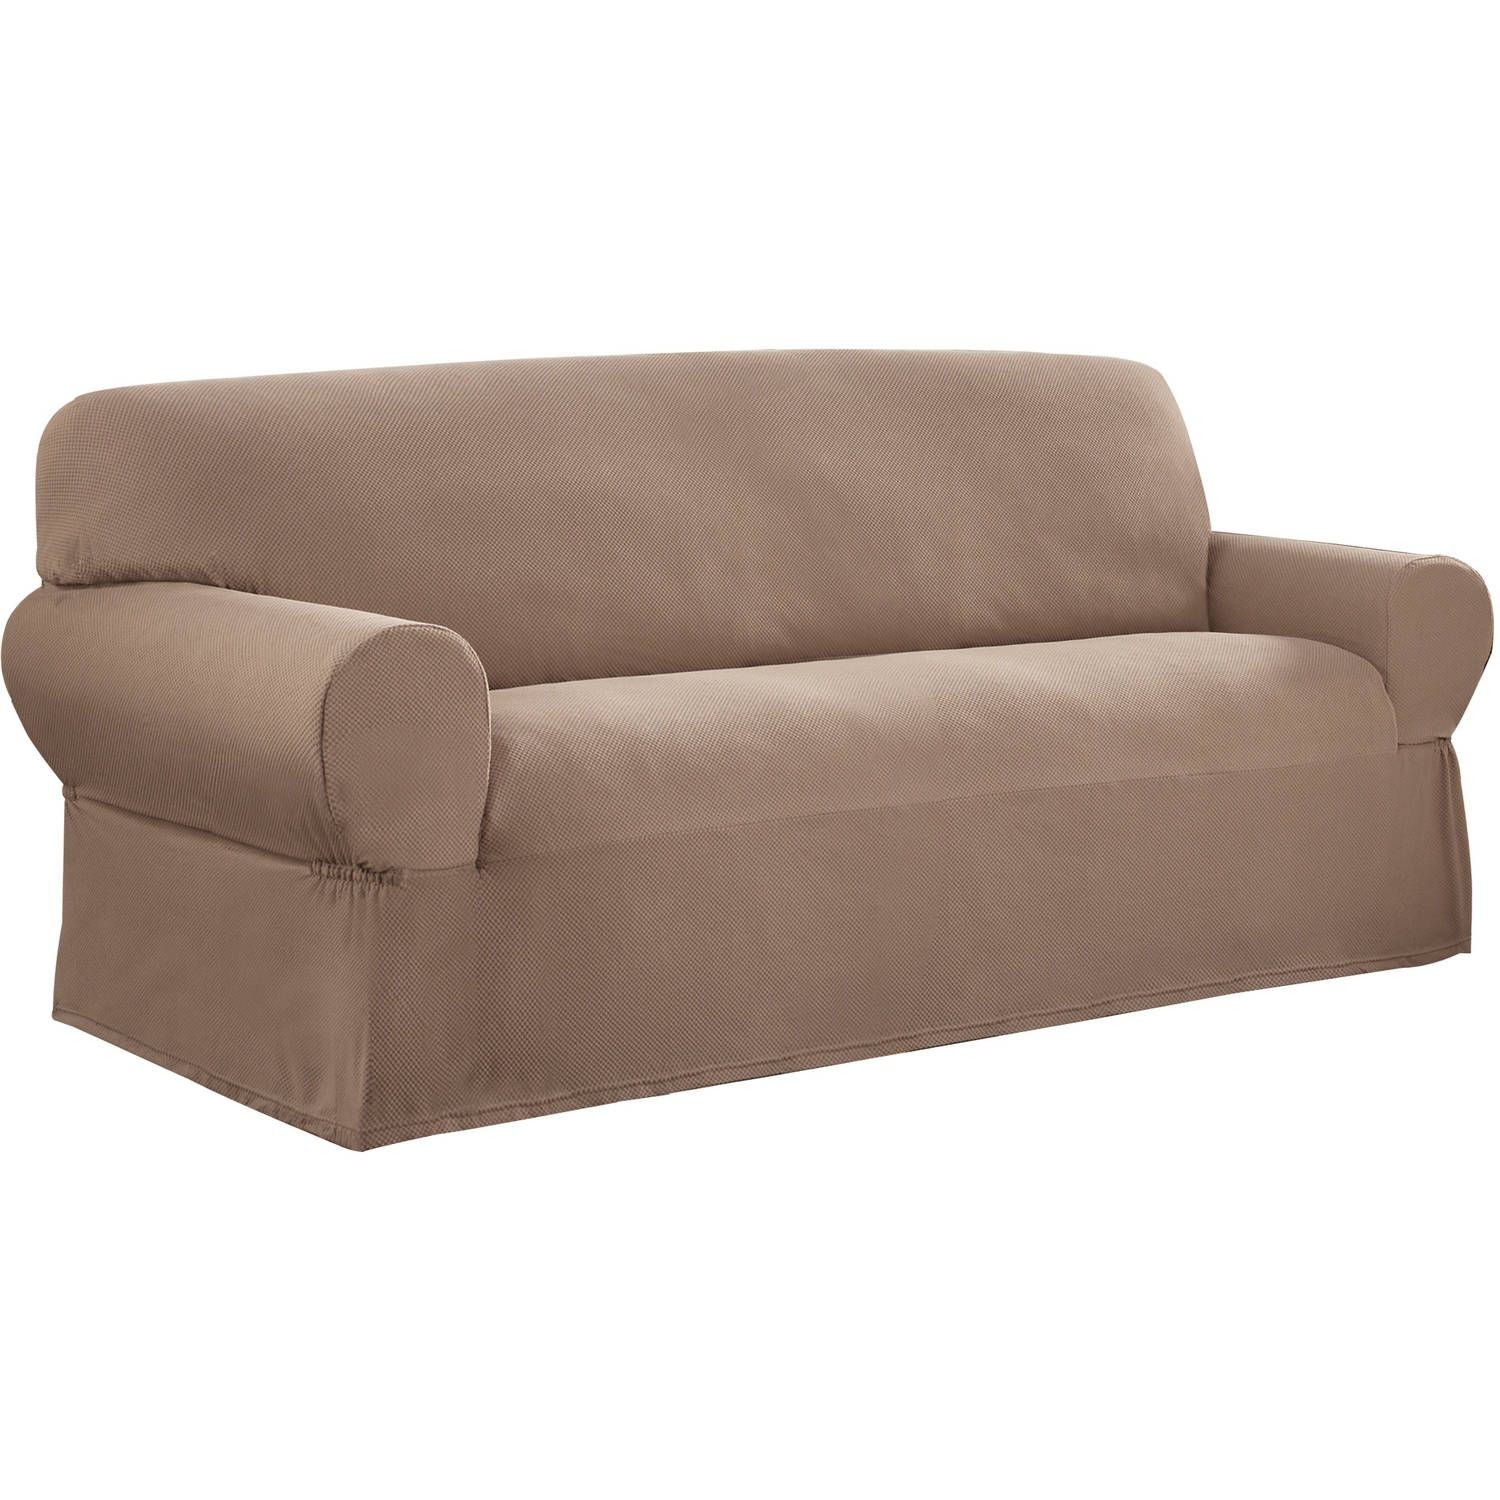 Mainstays 1 Piece Stretch Fabric Sofa Slipcover Walmart Throughout Slipcovers For Sofas And Chairs (View 10 of 15)